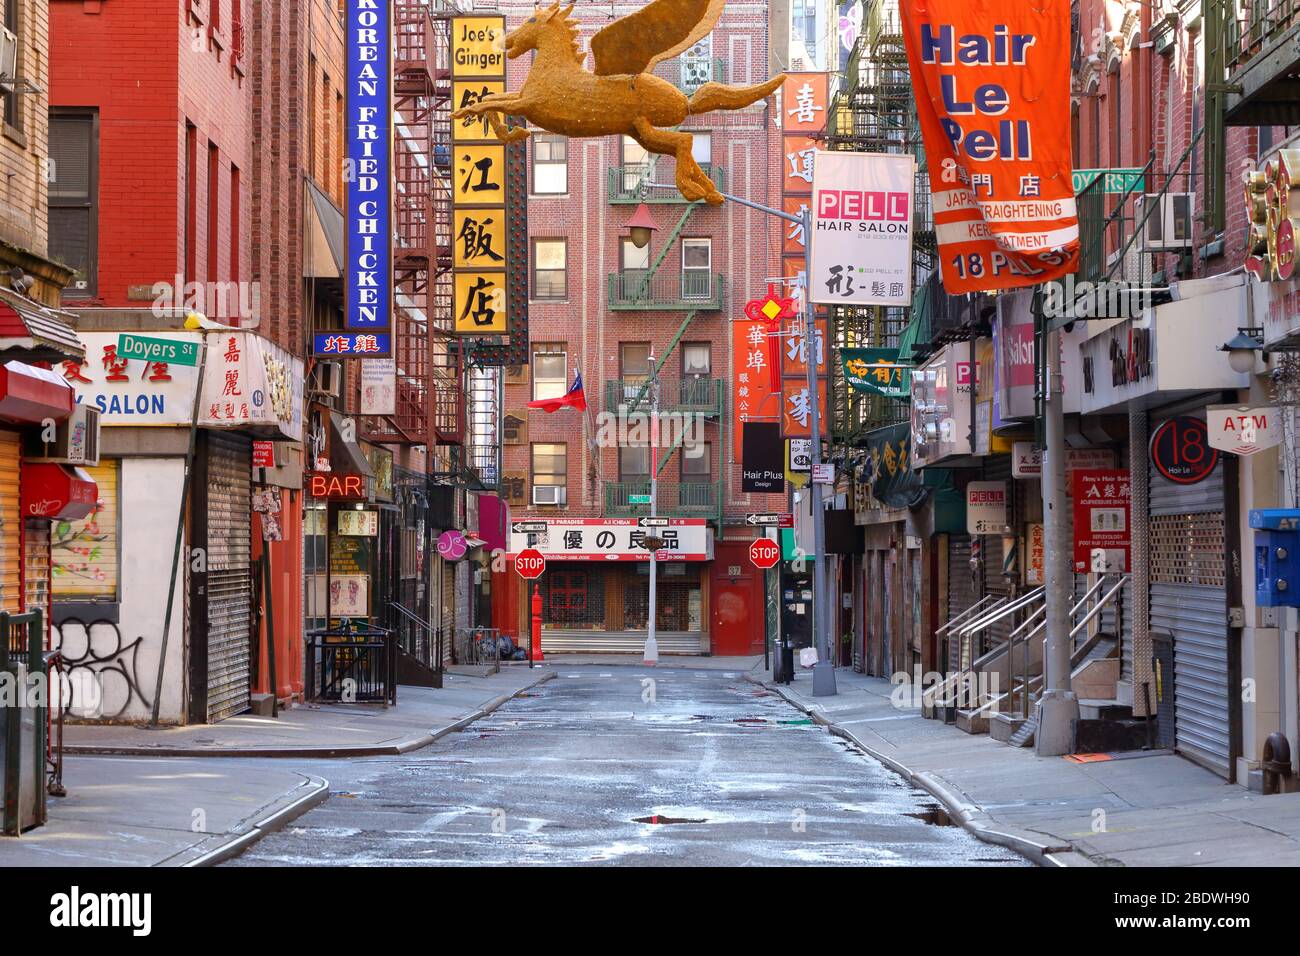 New York, NY, 9th April 2020, 17h00. Shuttered storefronts along Pell Street in the heart of Manhattan Chinatown... SEE MORE INFO FOR FULL CAPTION. Stock Photo